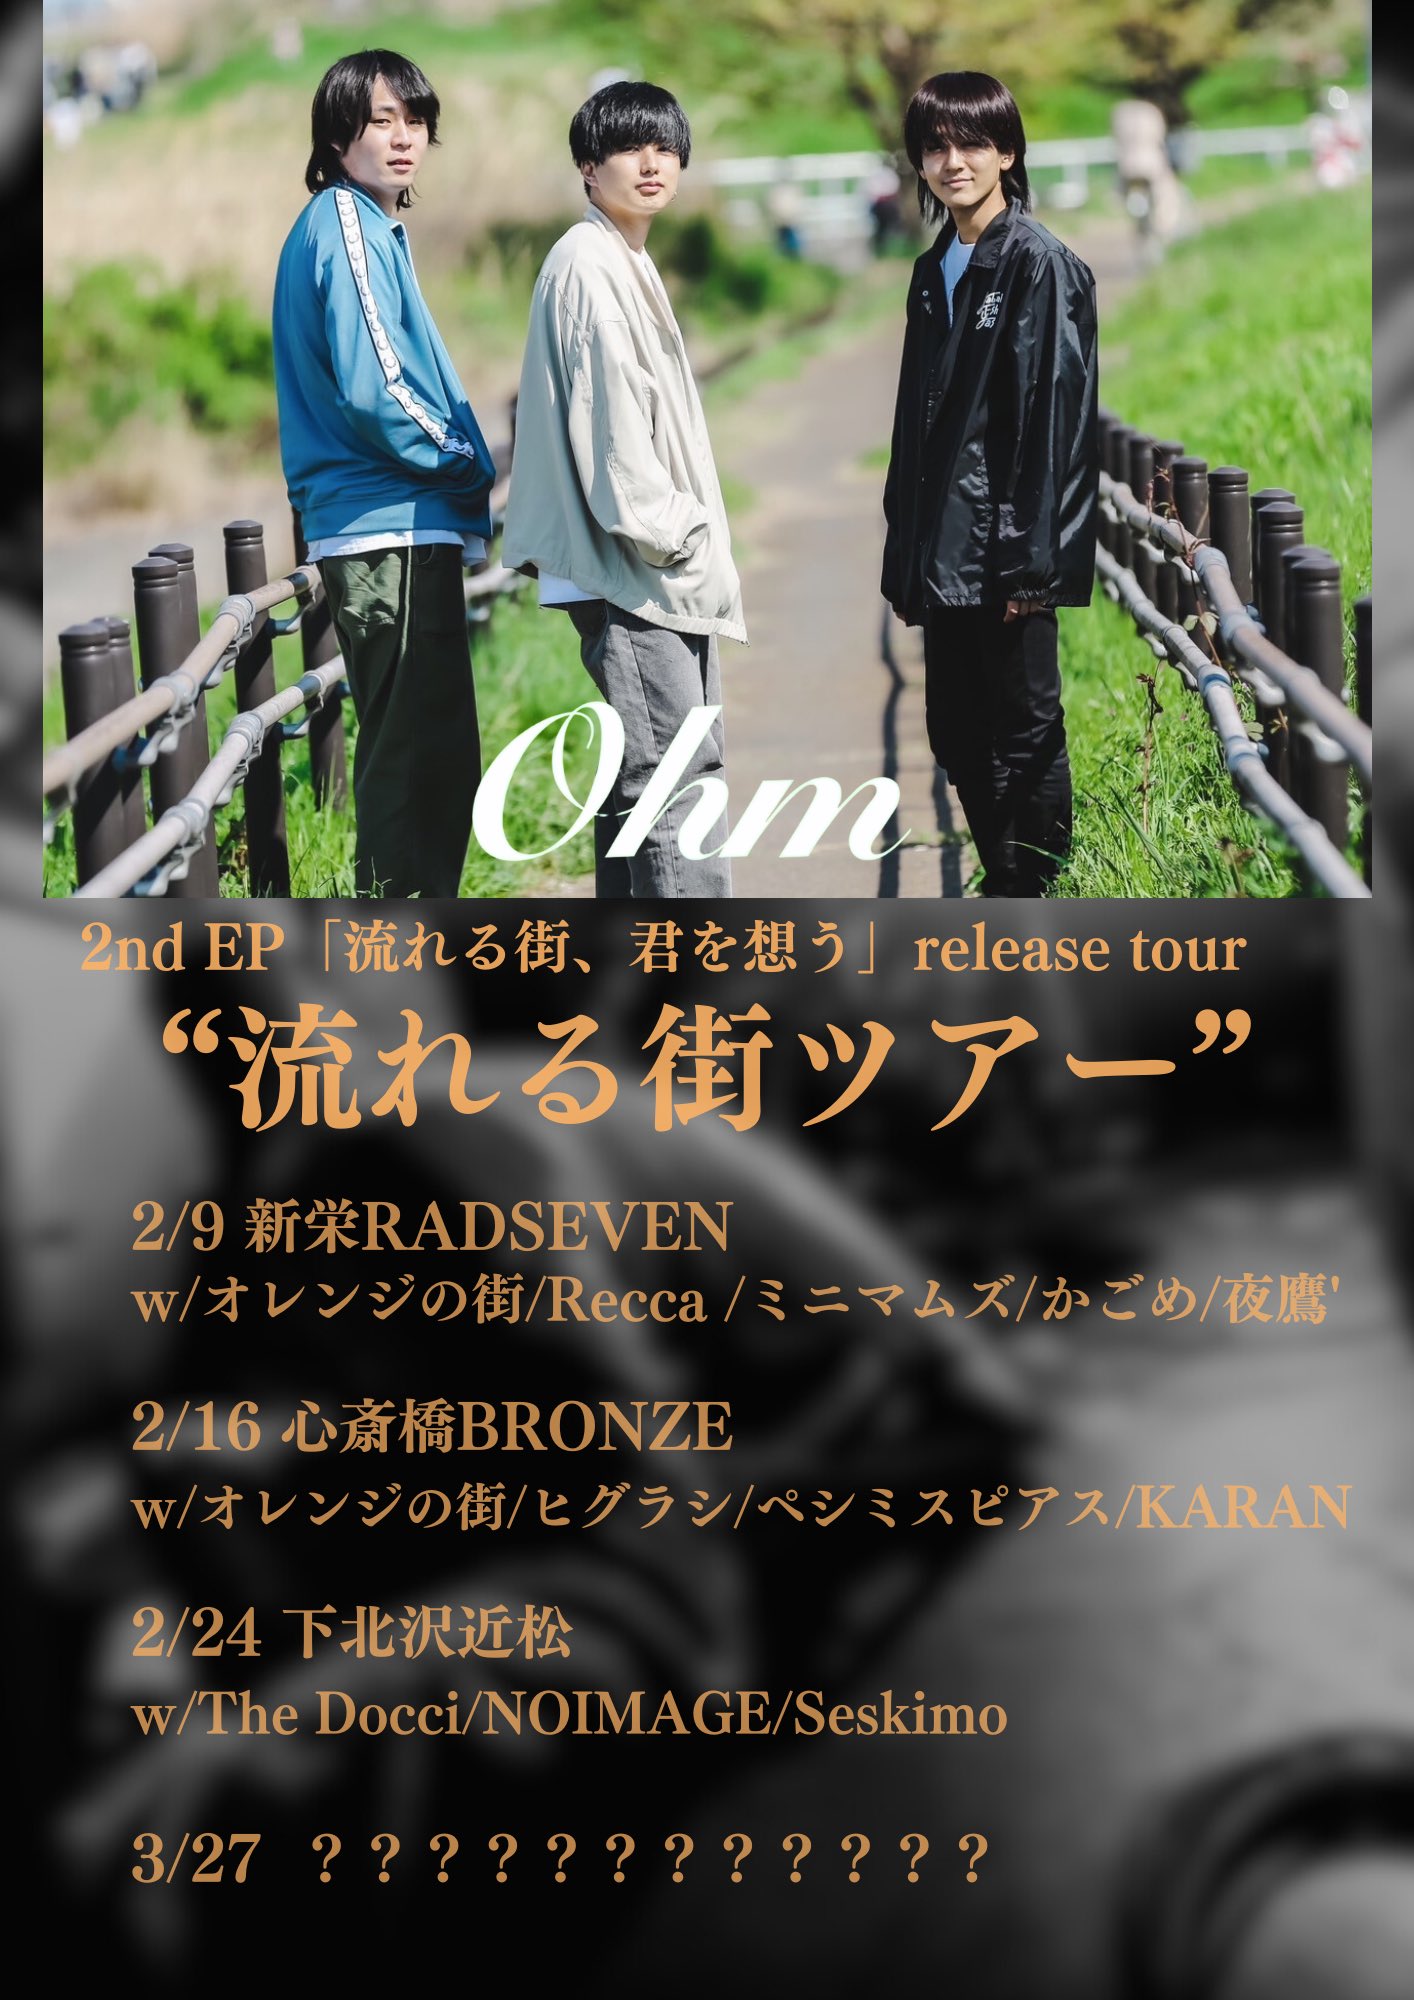 Ohm 2nd E.P.「流れる街、君を想う」release tour